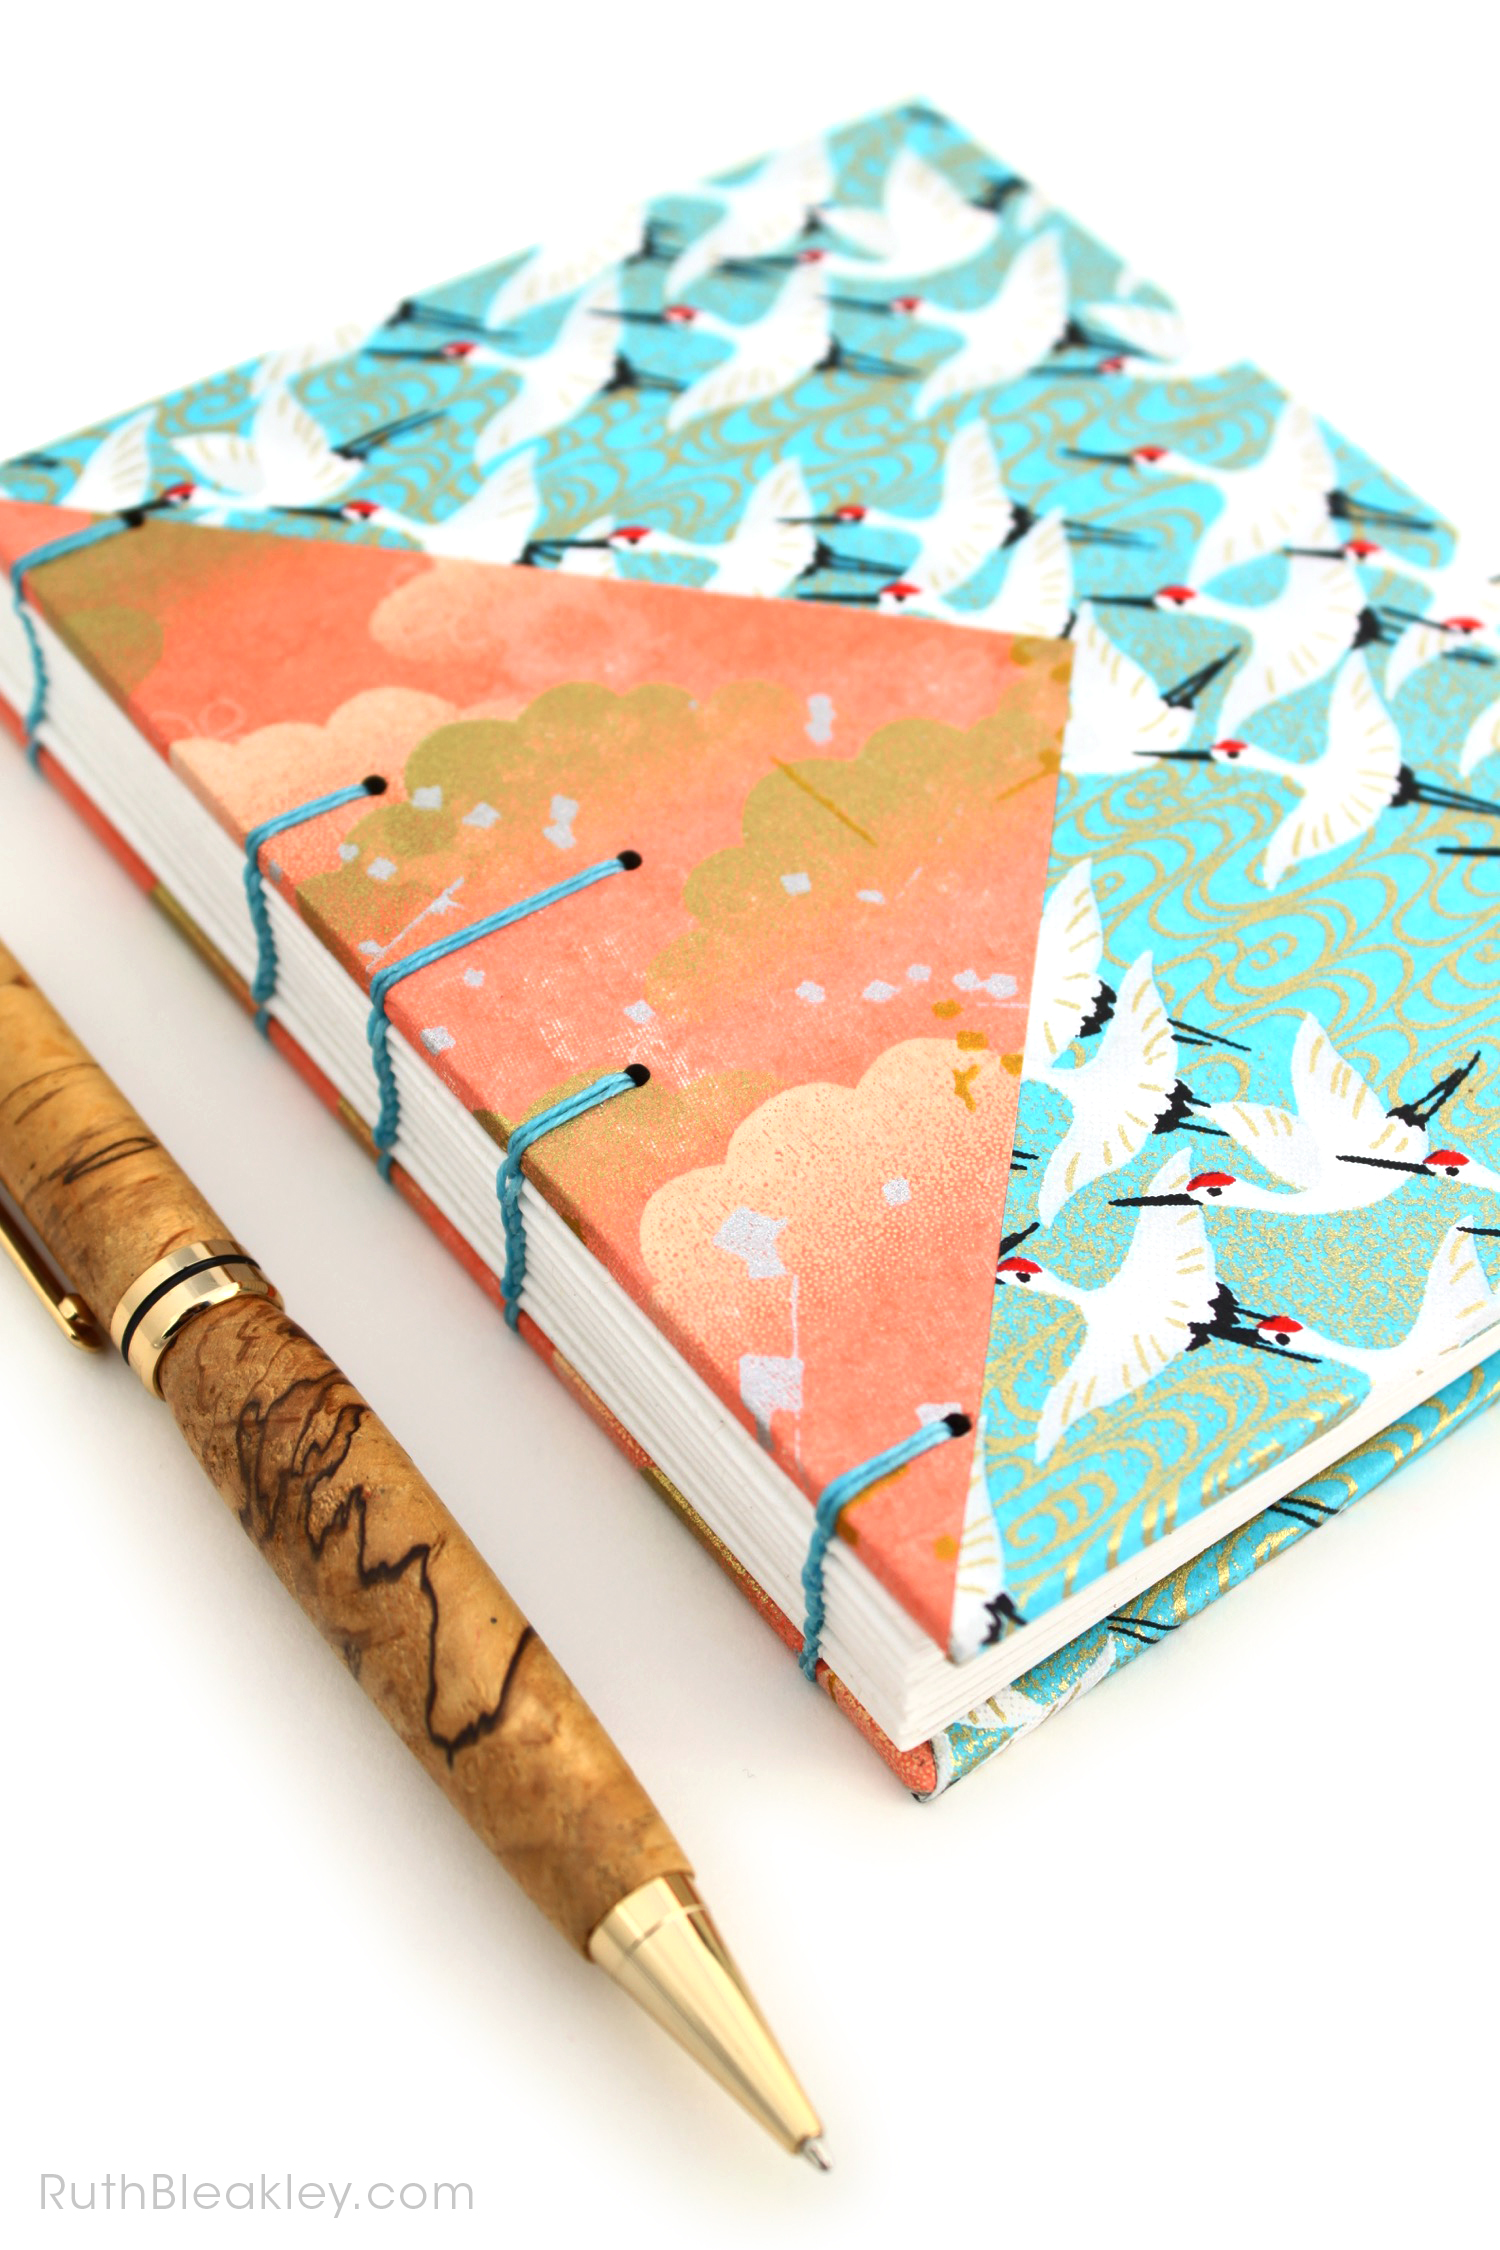 Blue Cranes and Peach Cloud Twin Journals by Ruth Bleakley that lay flat when open - 6